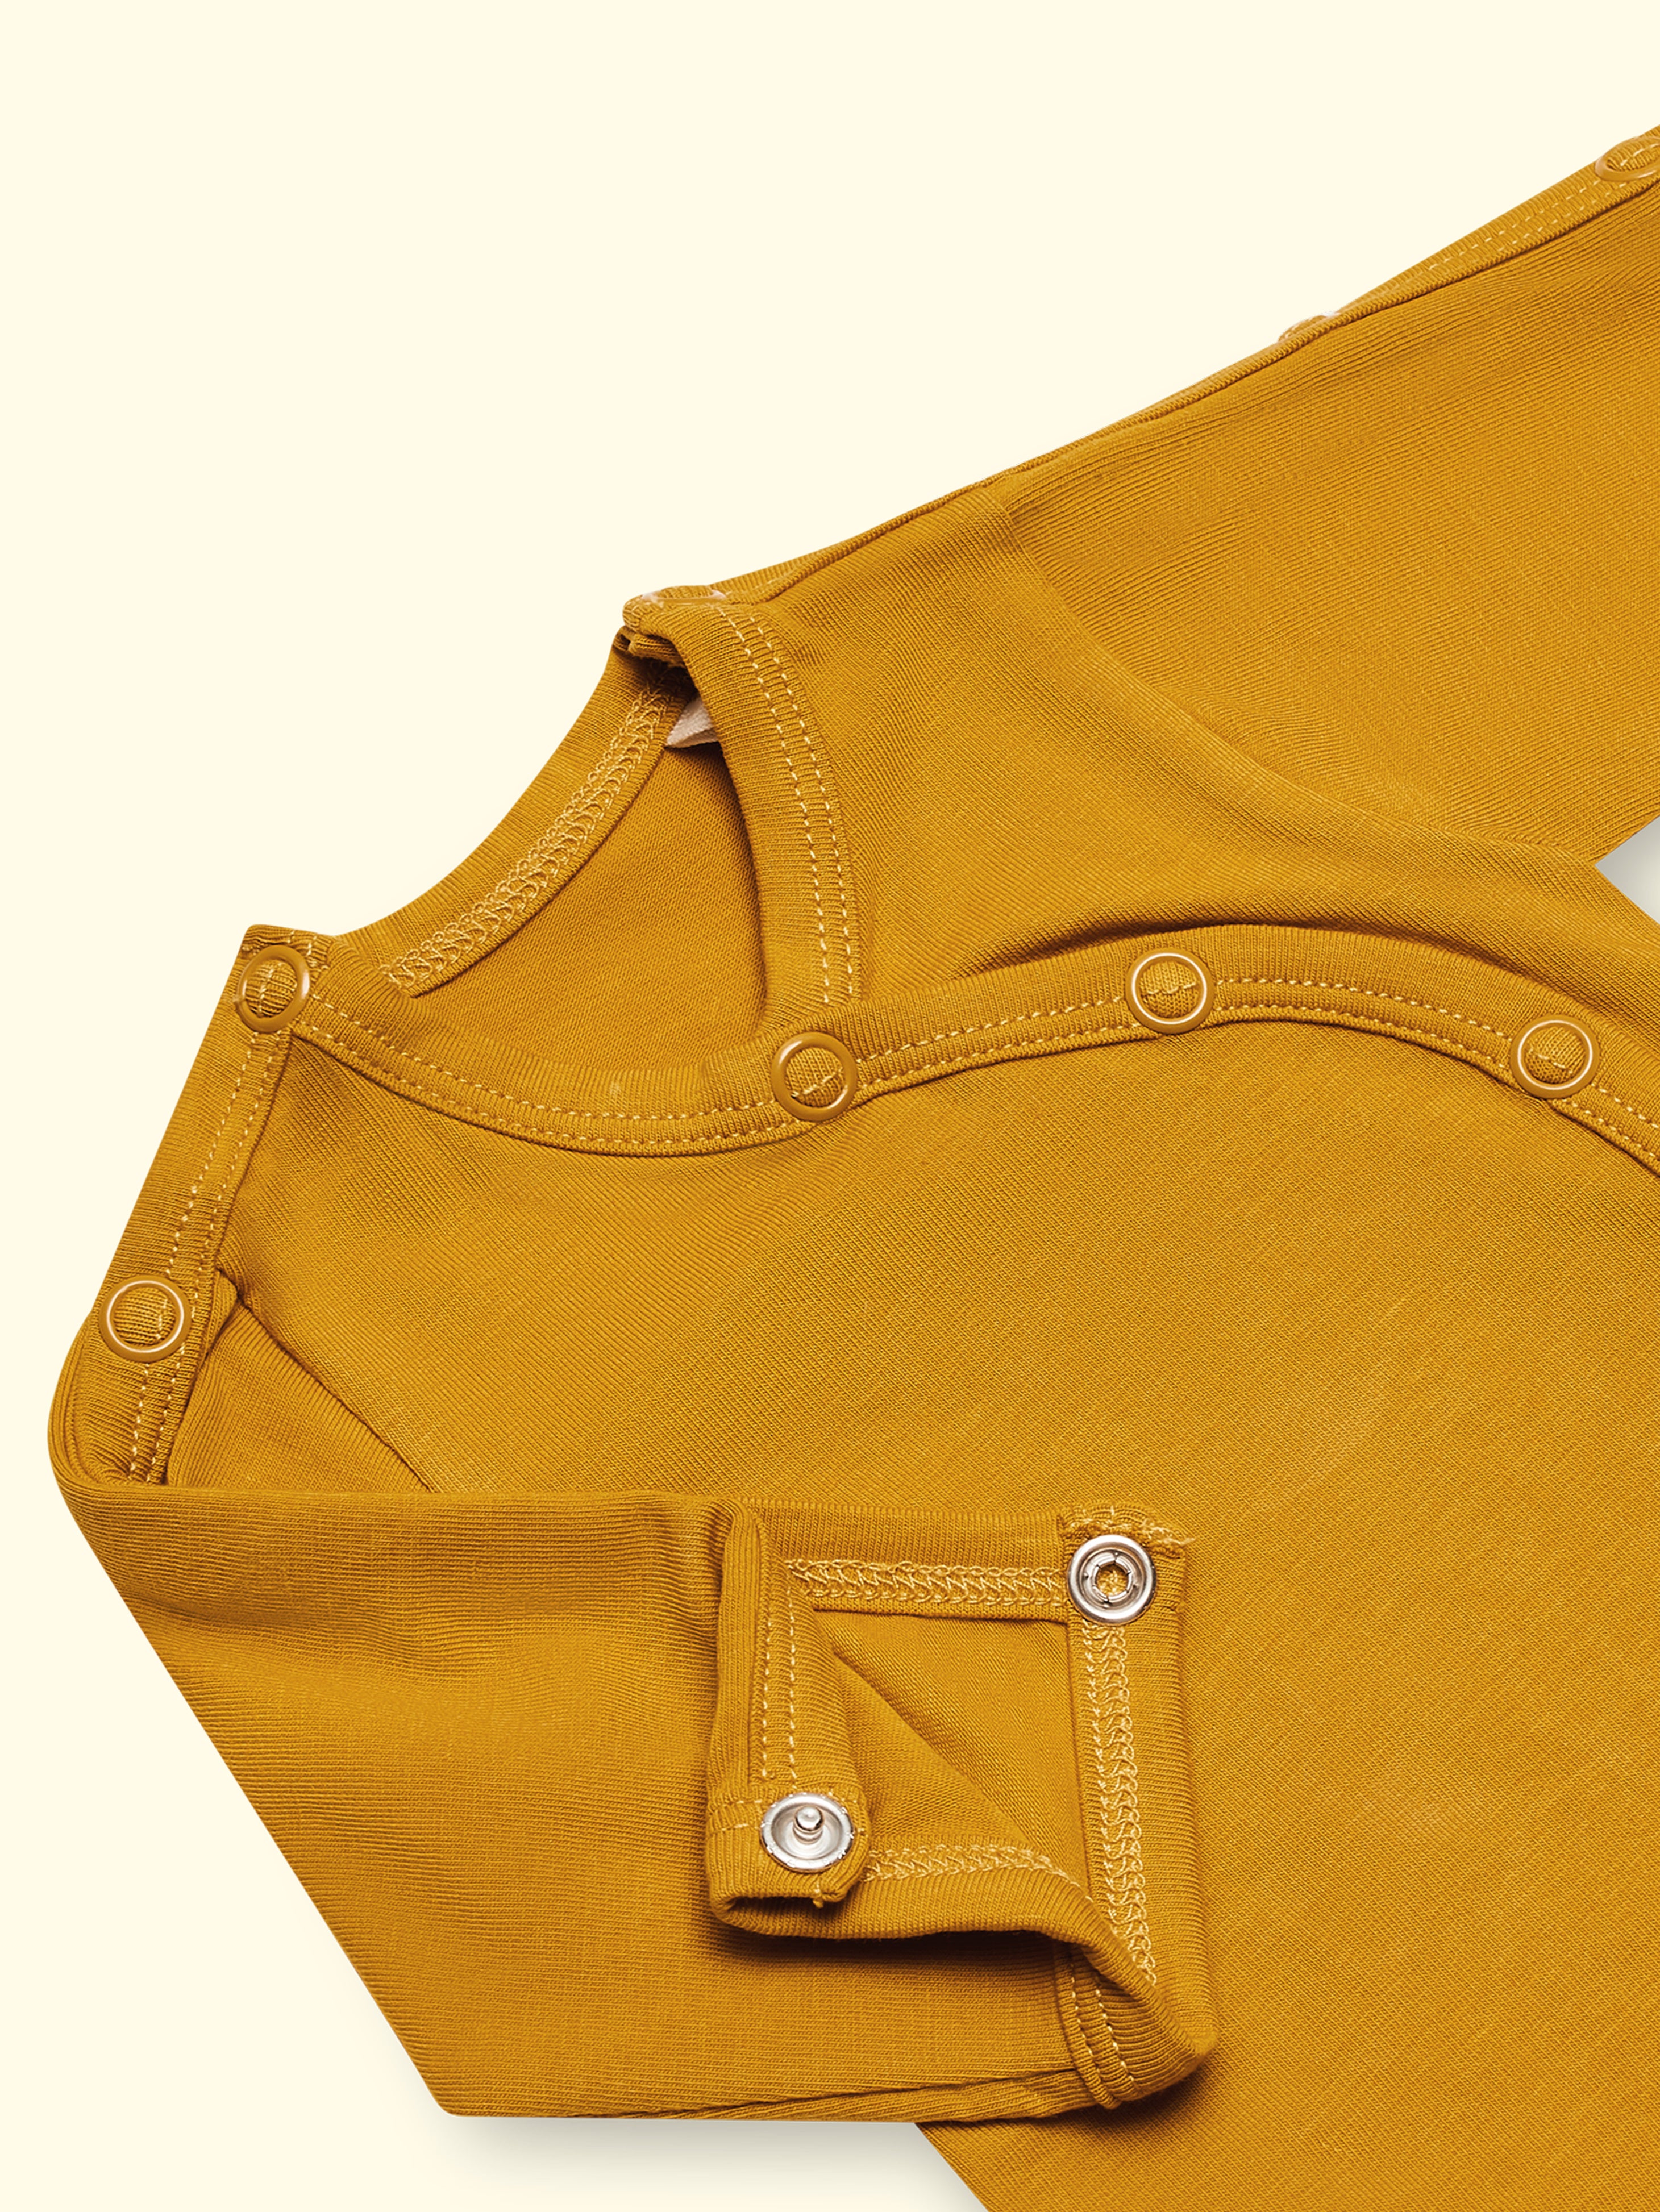 Adaptive bodysuit with sleeve opening for premature babies and babies - mustard yellow